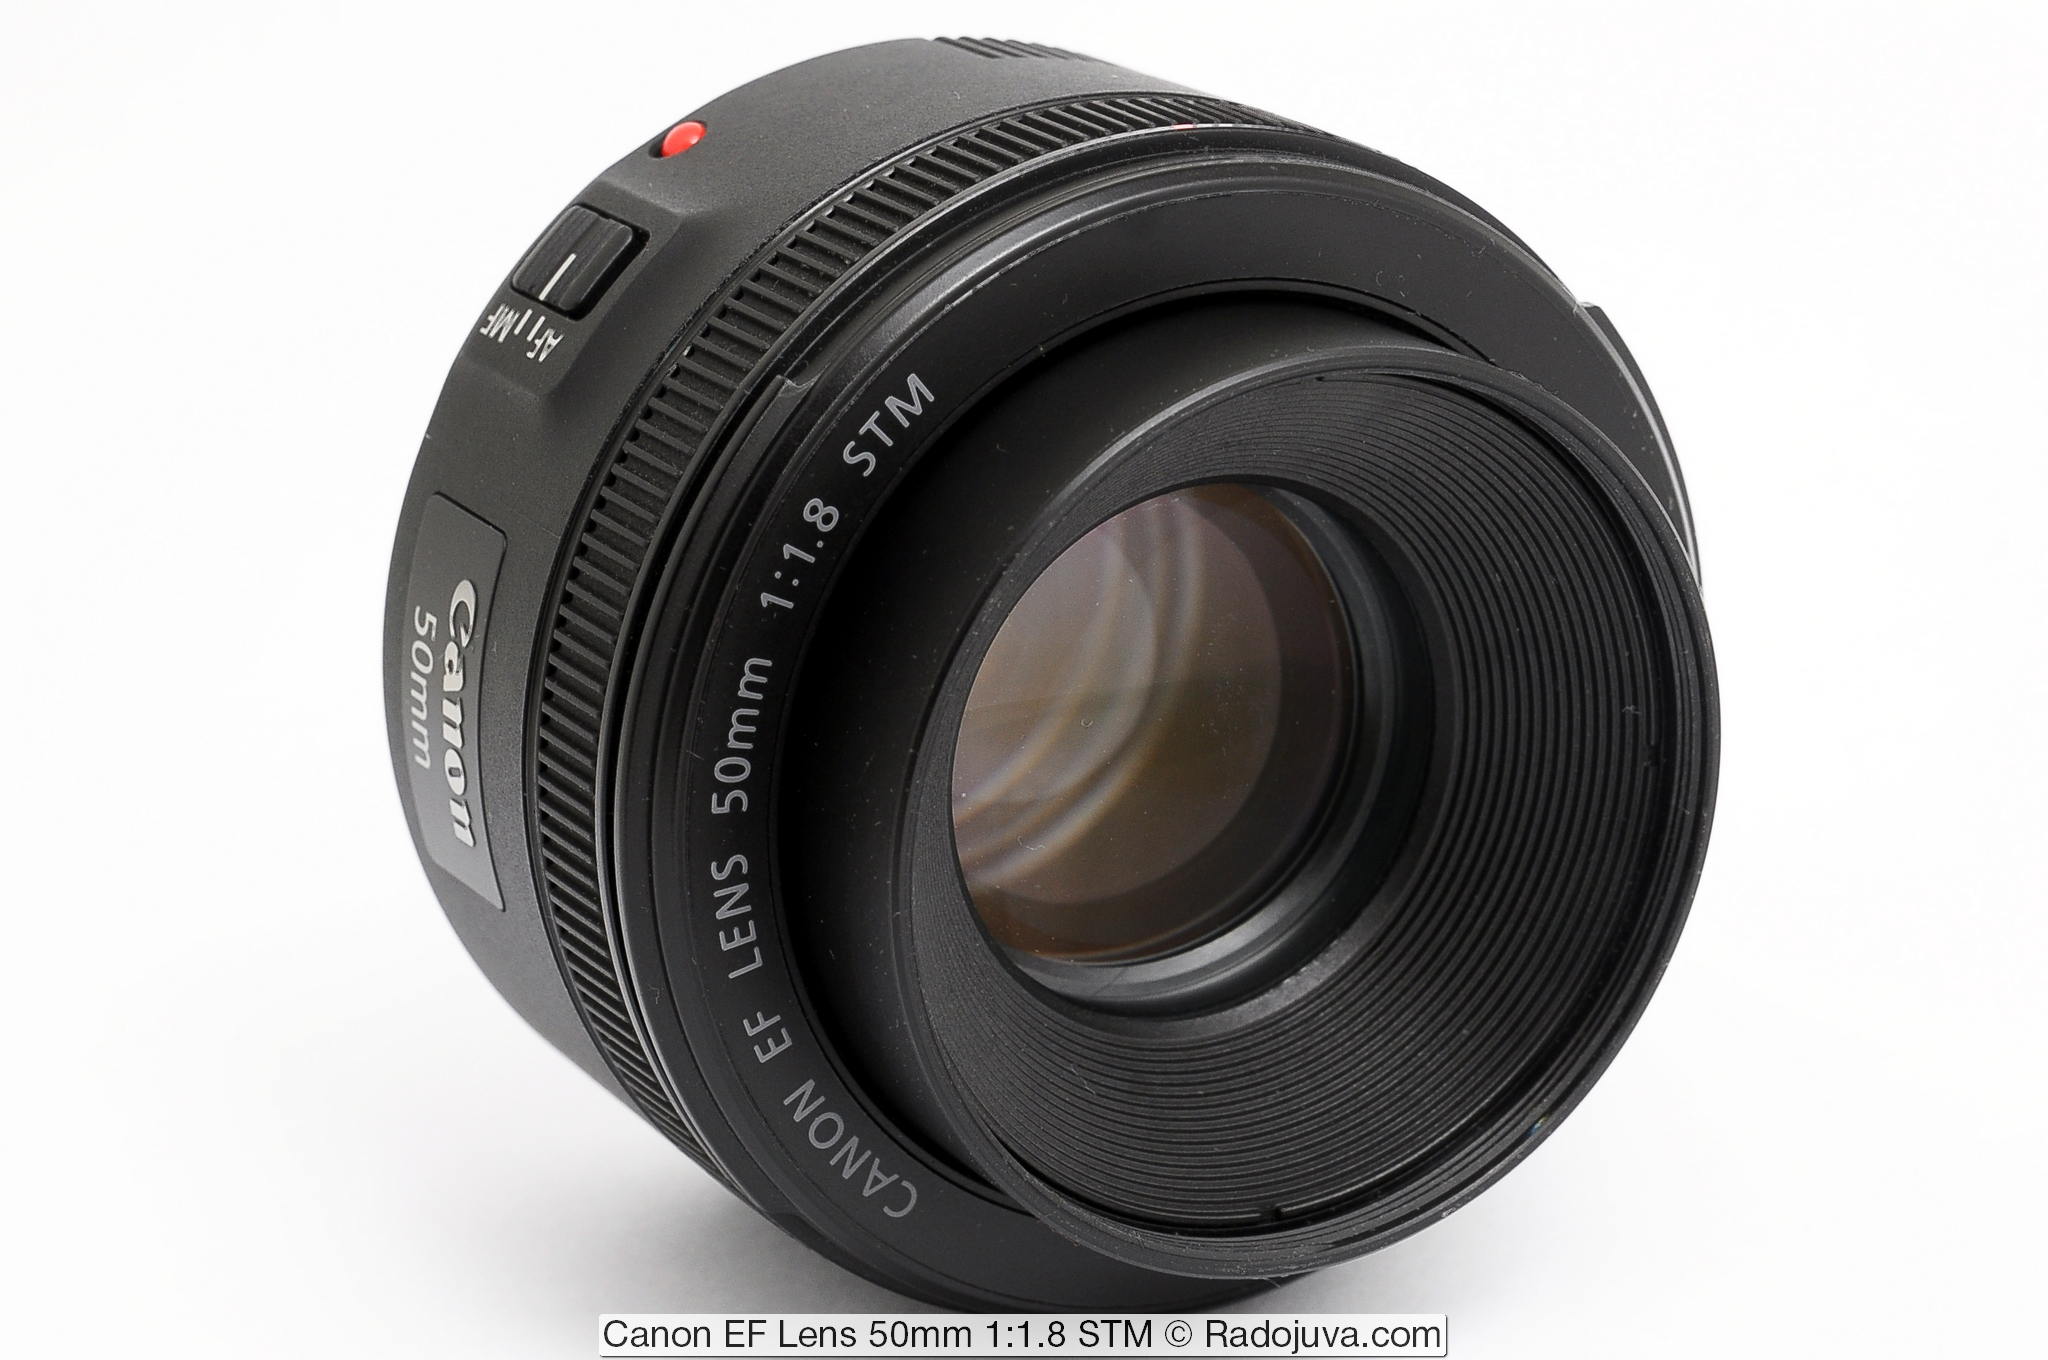 Canon 50 мм. Canon 50mm 1.8 STM. Canon EF 50mm f/1.8 STM. Canon EF Lens 50mm 1:1.8 STM. Canon 50mm f/1.8 STM.